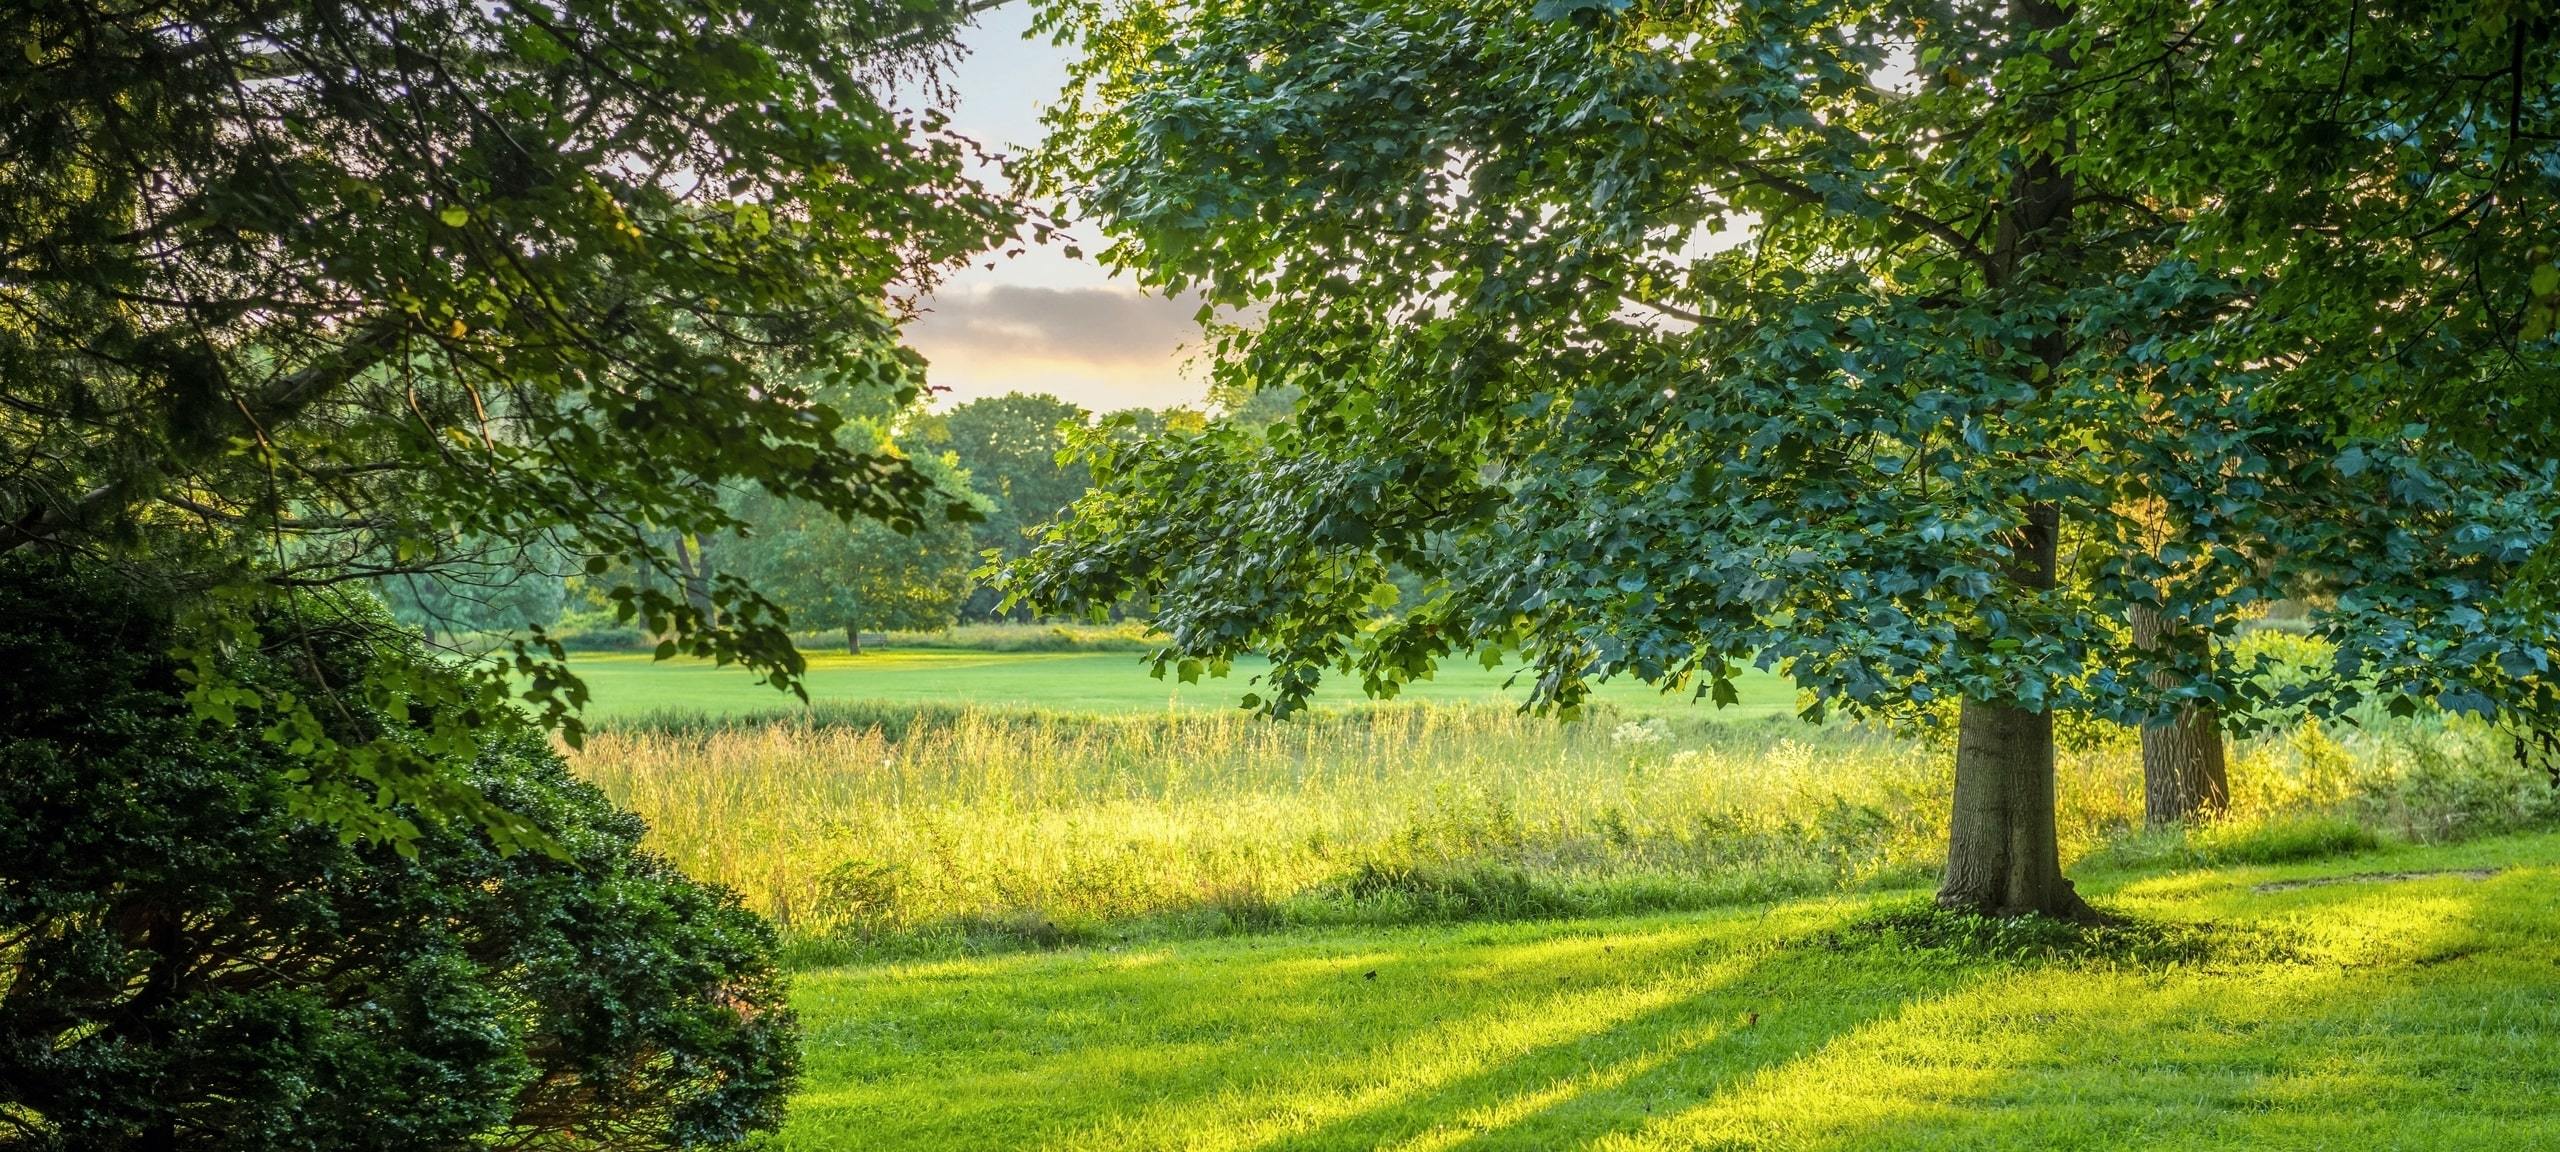 Green field and summer trees during sunset, typical of Interlaken, NJ